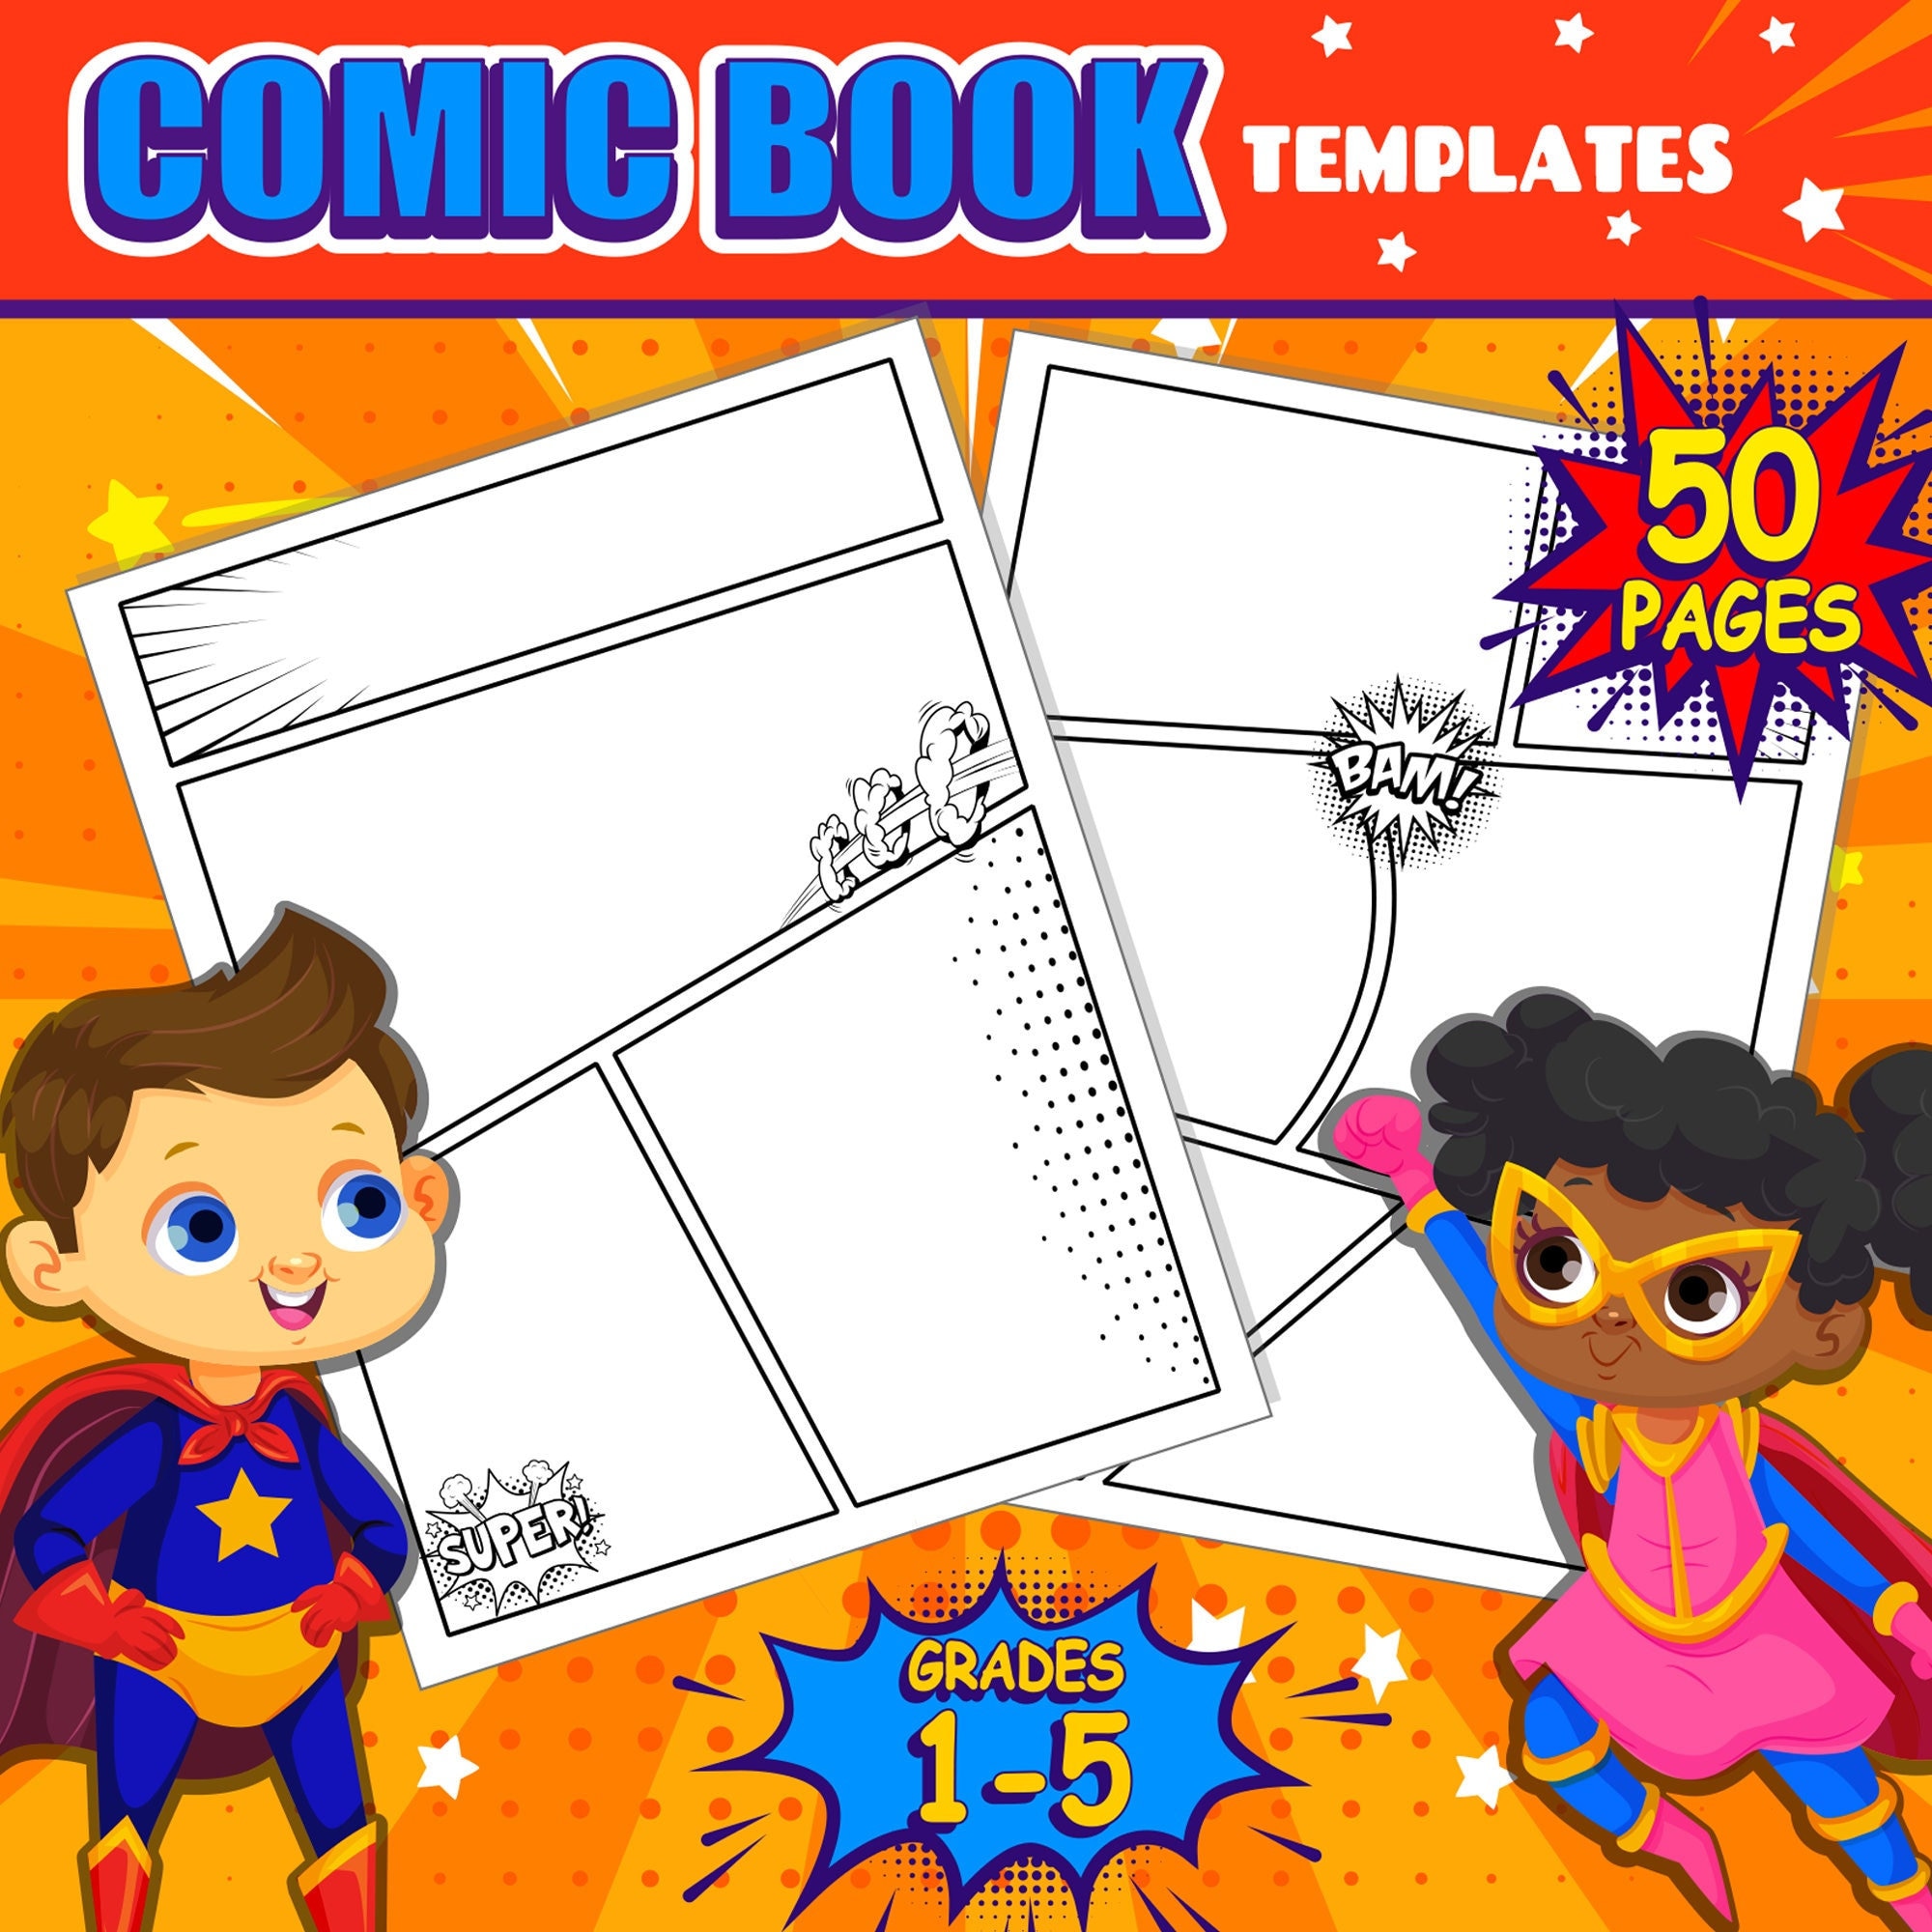 Comic Book Empty: Comic Kids Crafts For Girls Age 6 To Practice